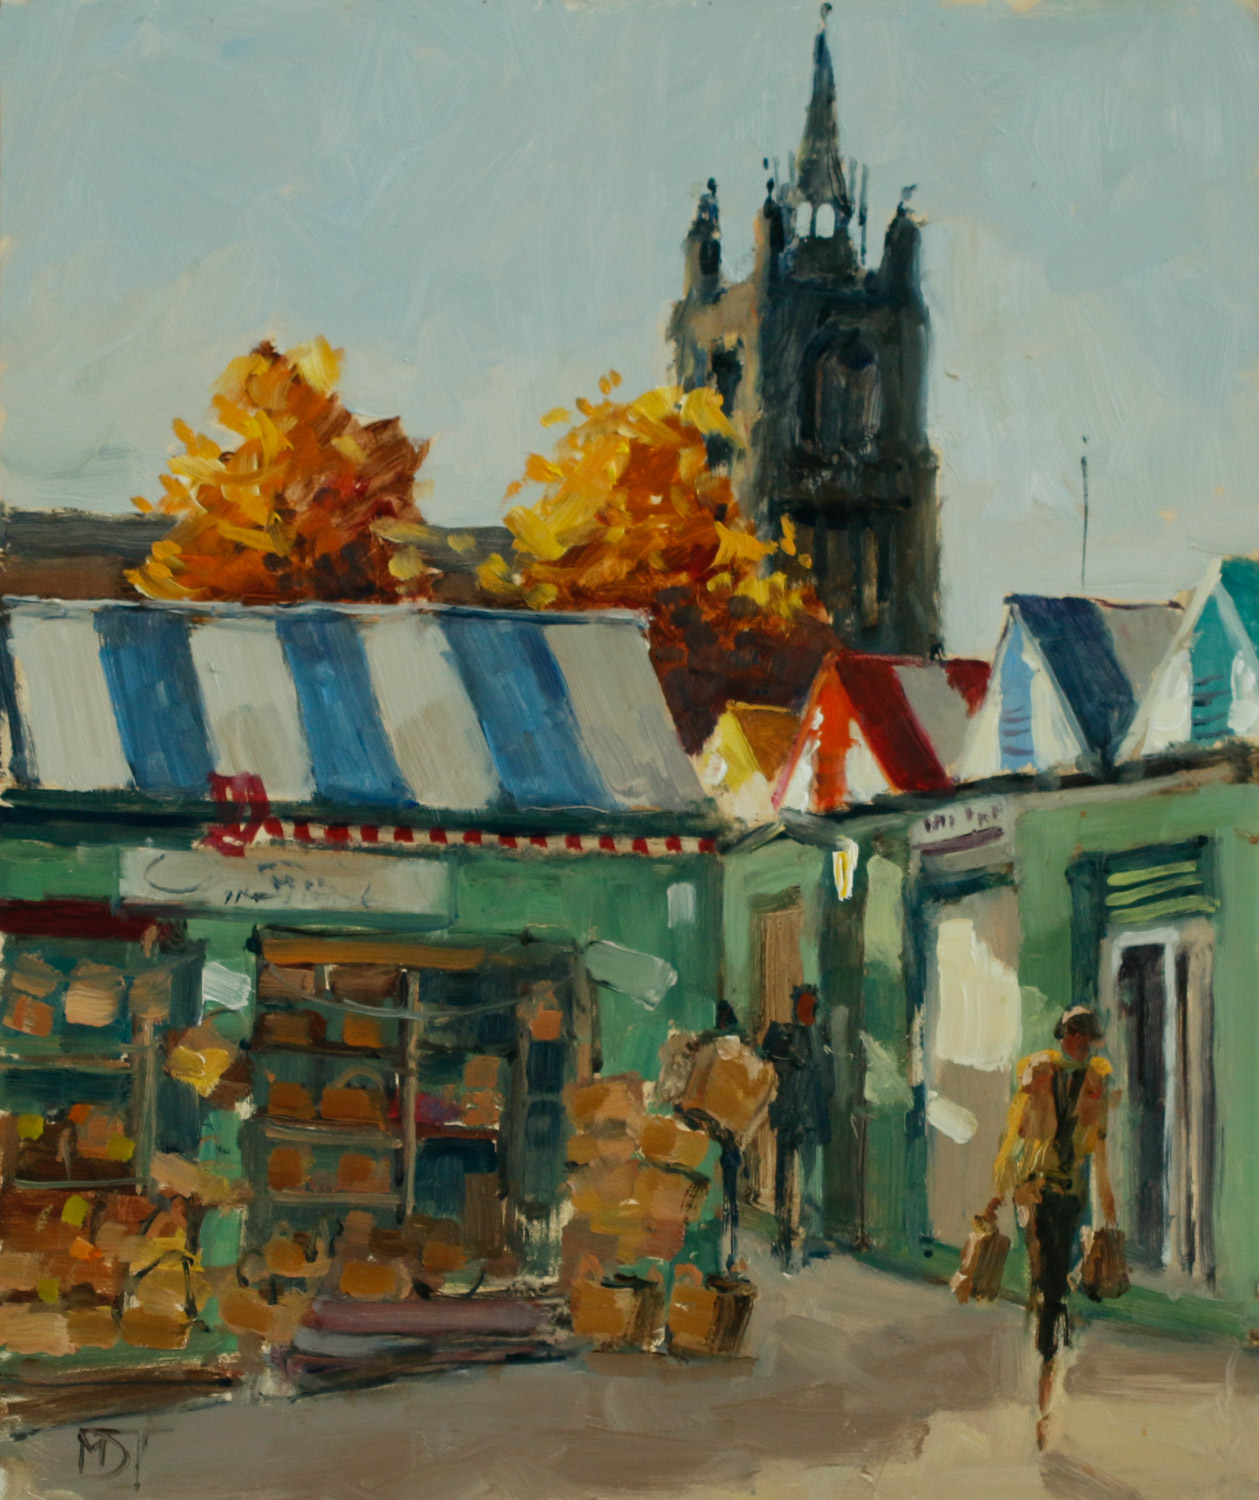 Artist Mo Teeuw - The Basket Stall, £350 10x12 Oil on Board at Paint Out Norwich 2015